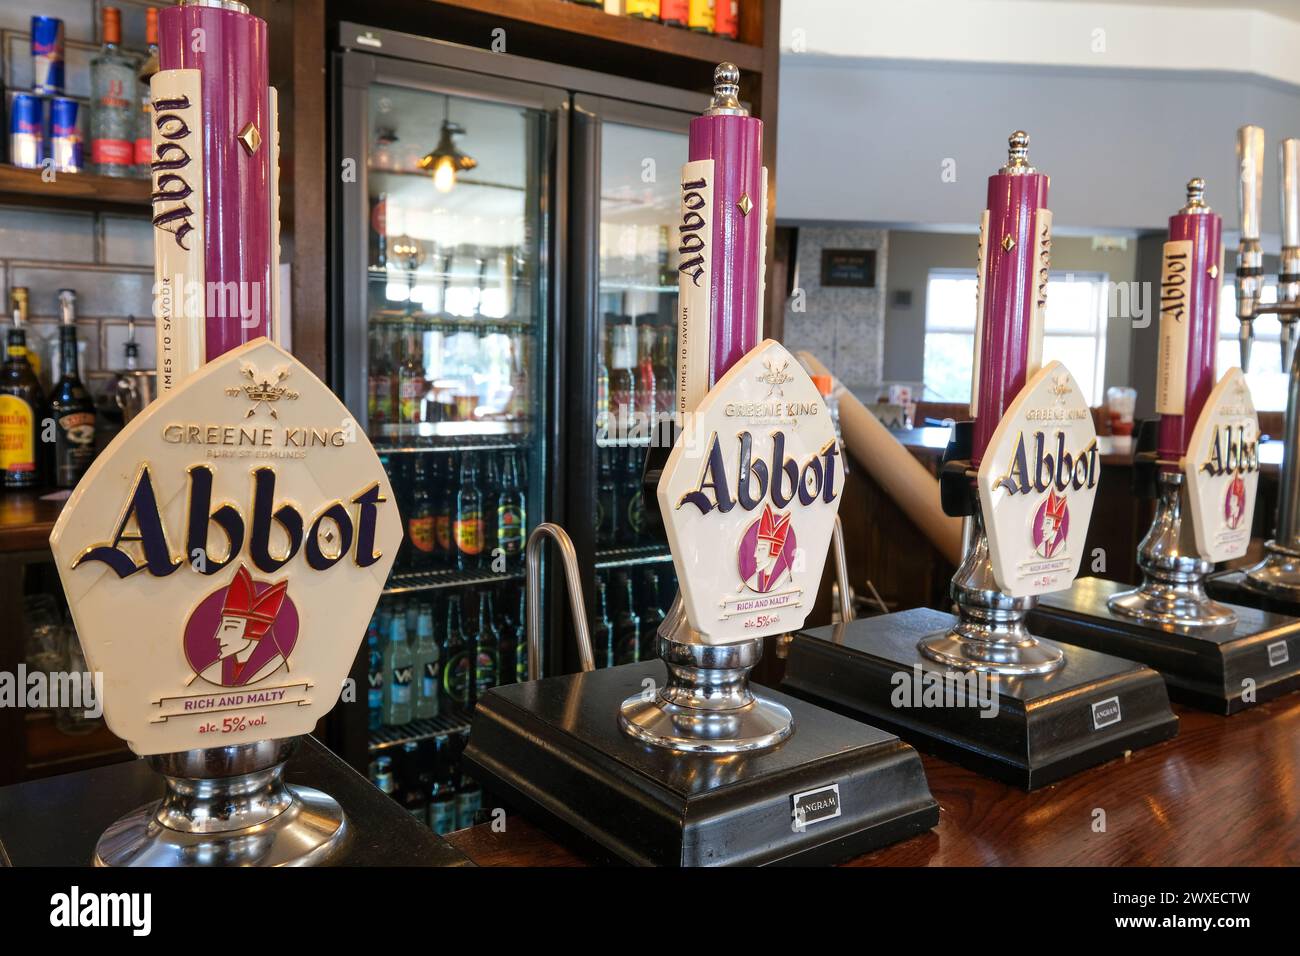 Abbot Ale pumps in a Greene King pub Stock Photo